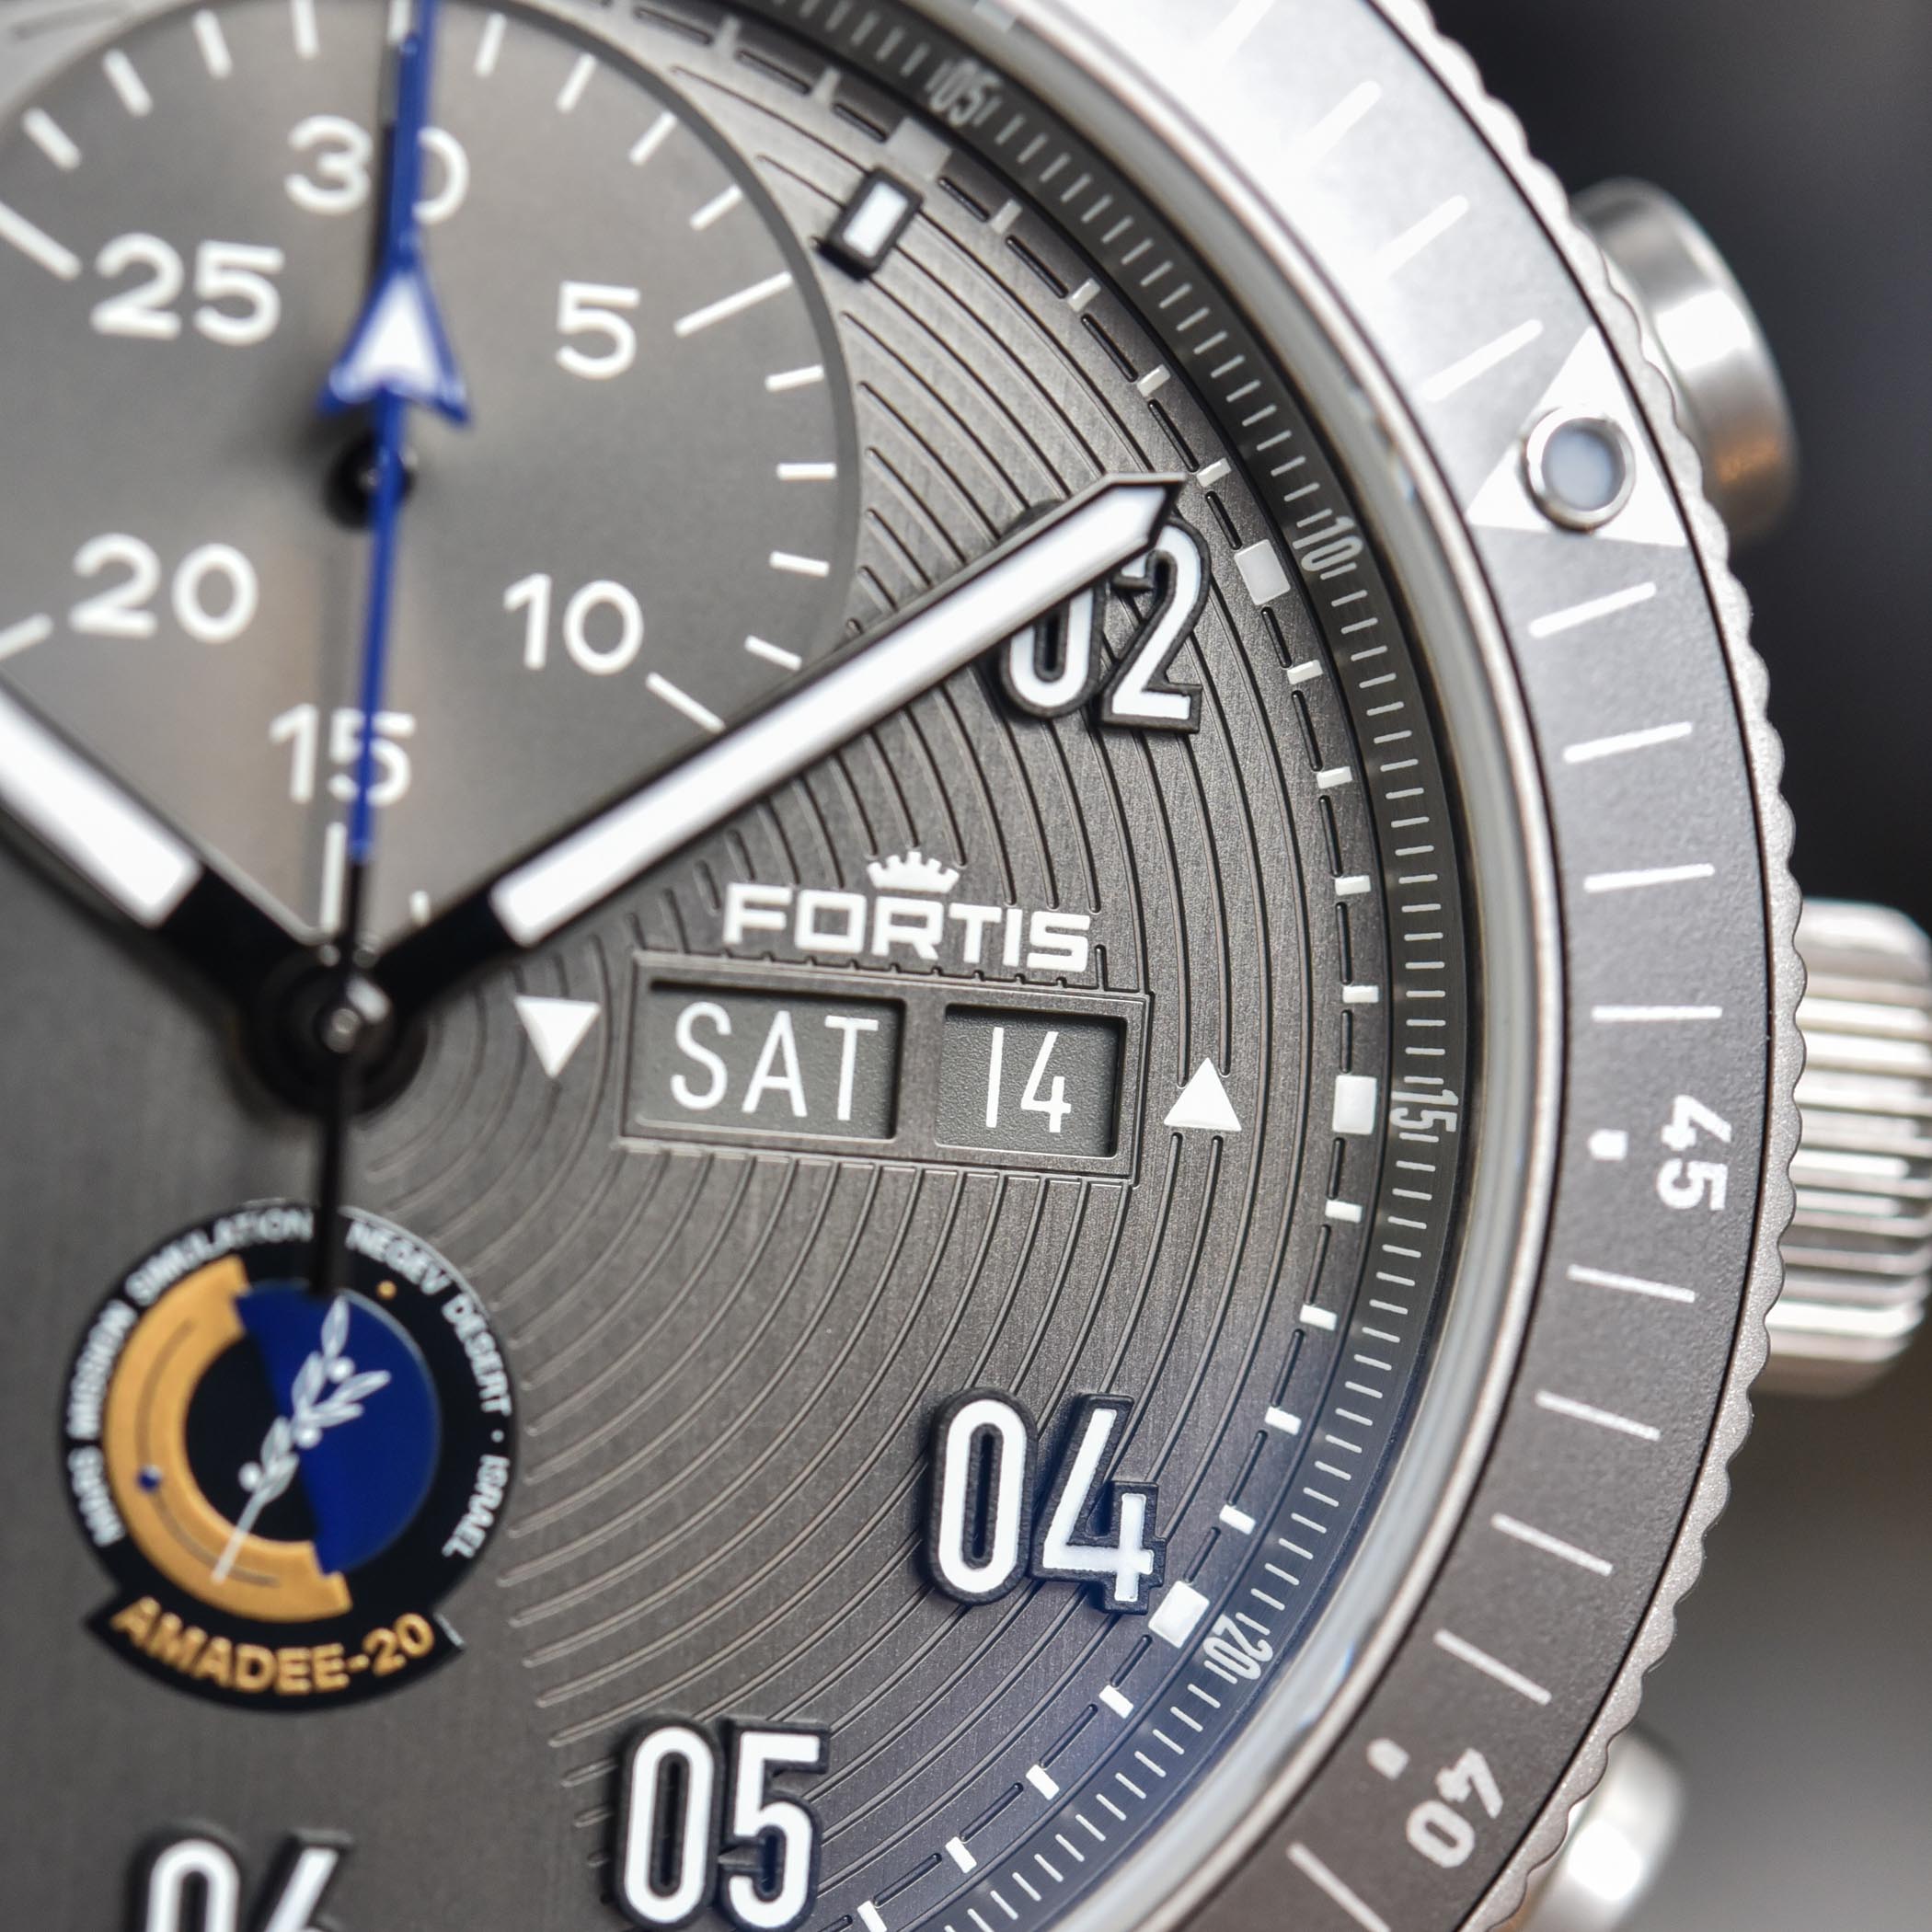 Fortis Official Cosmonauts Chronograph Amadee-20